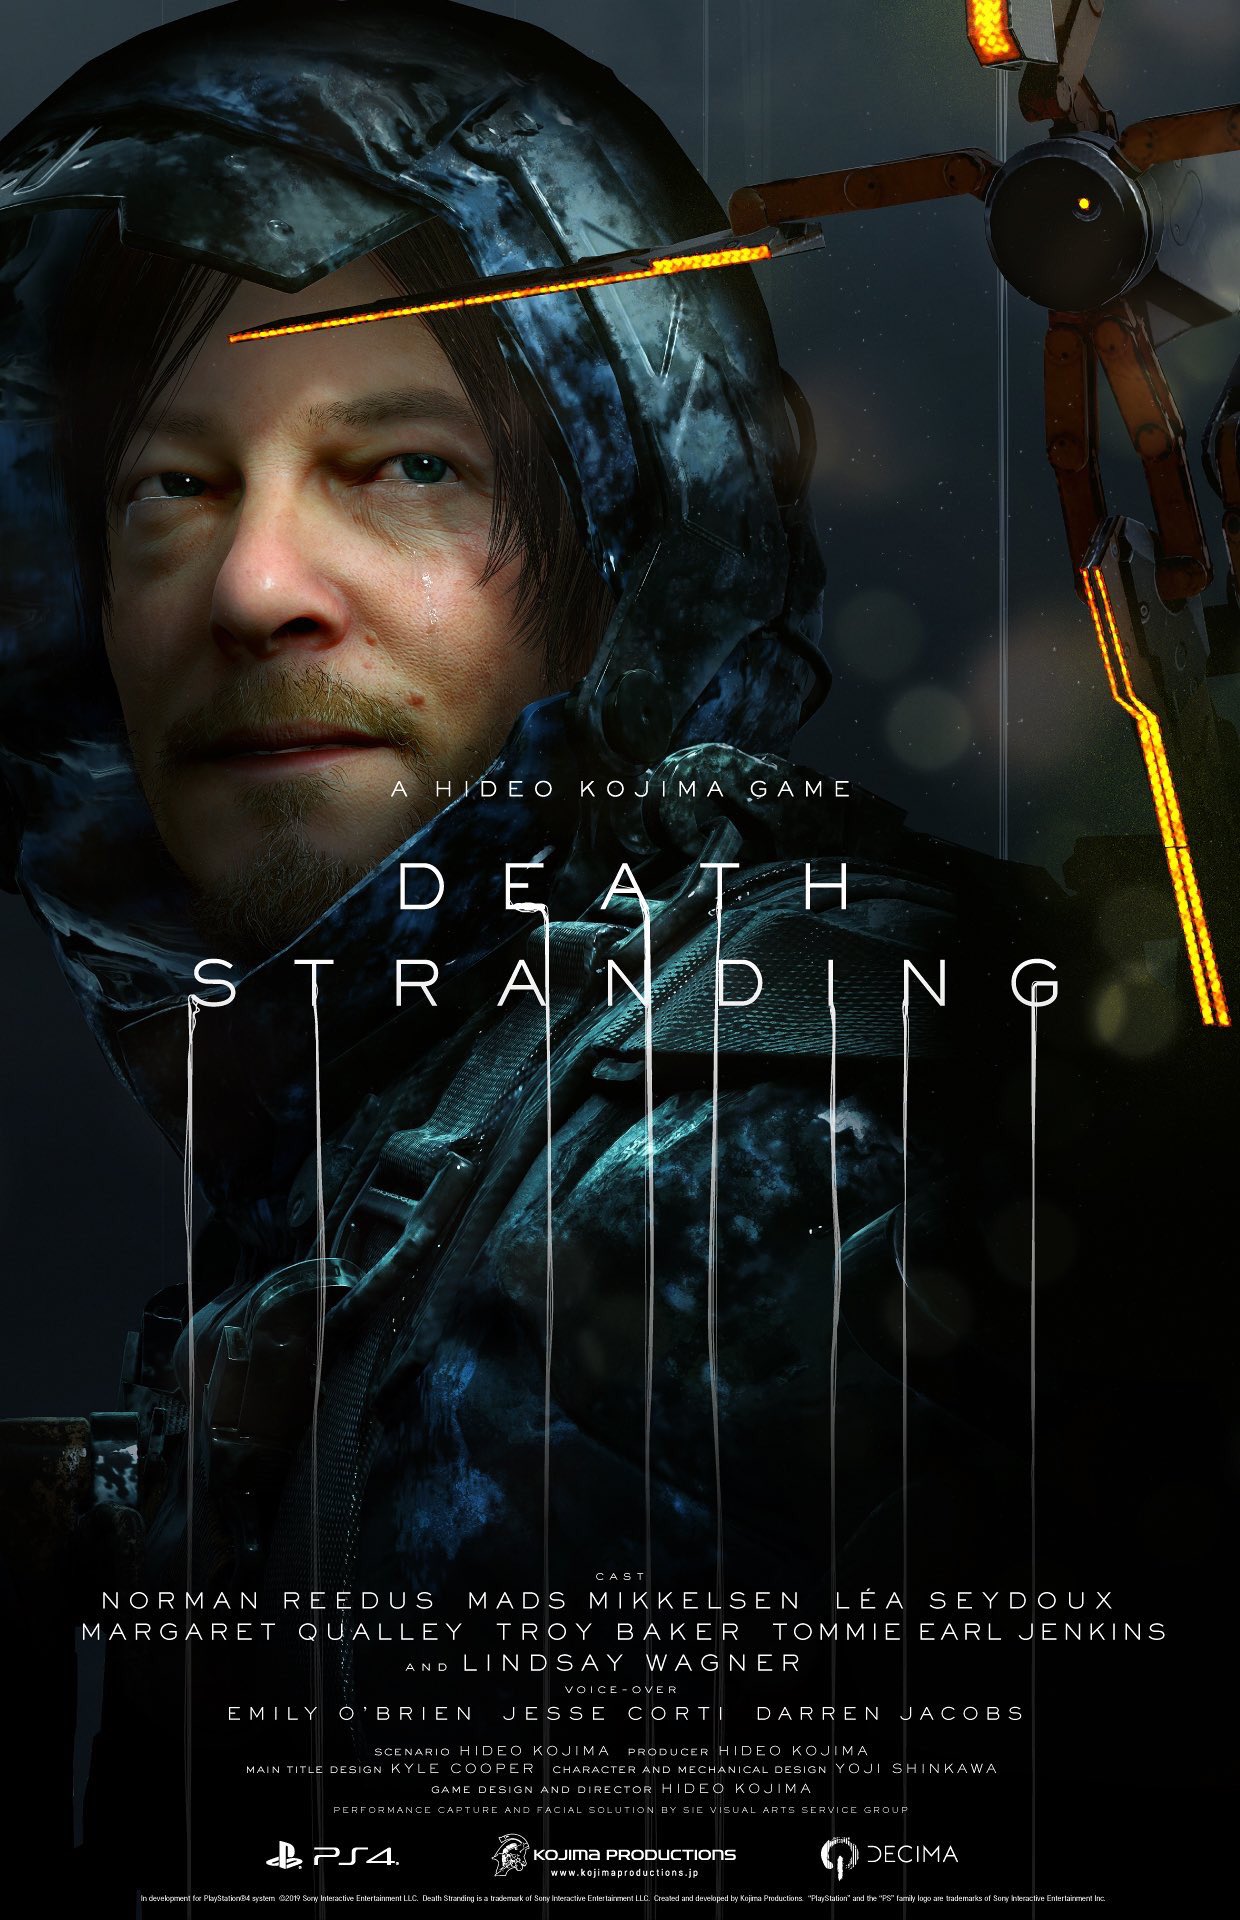 File:Death Stranding 2 logo.png - Wikimedia Commons